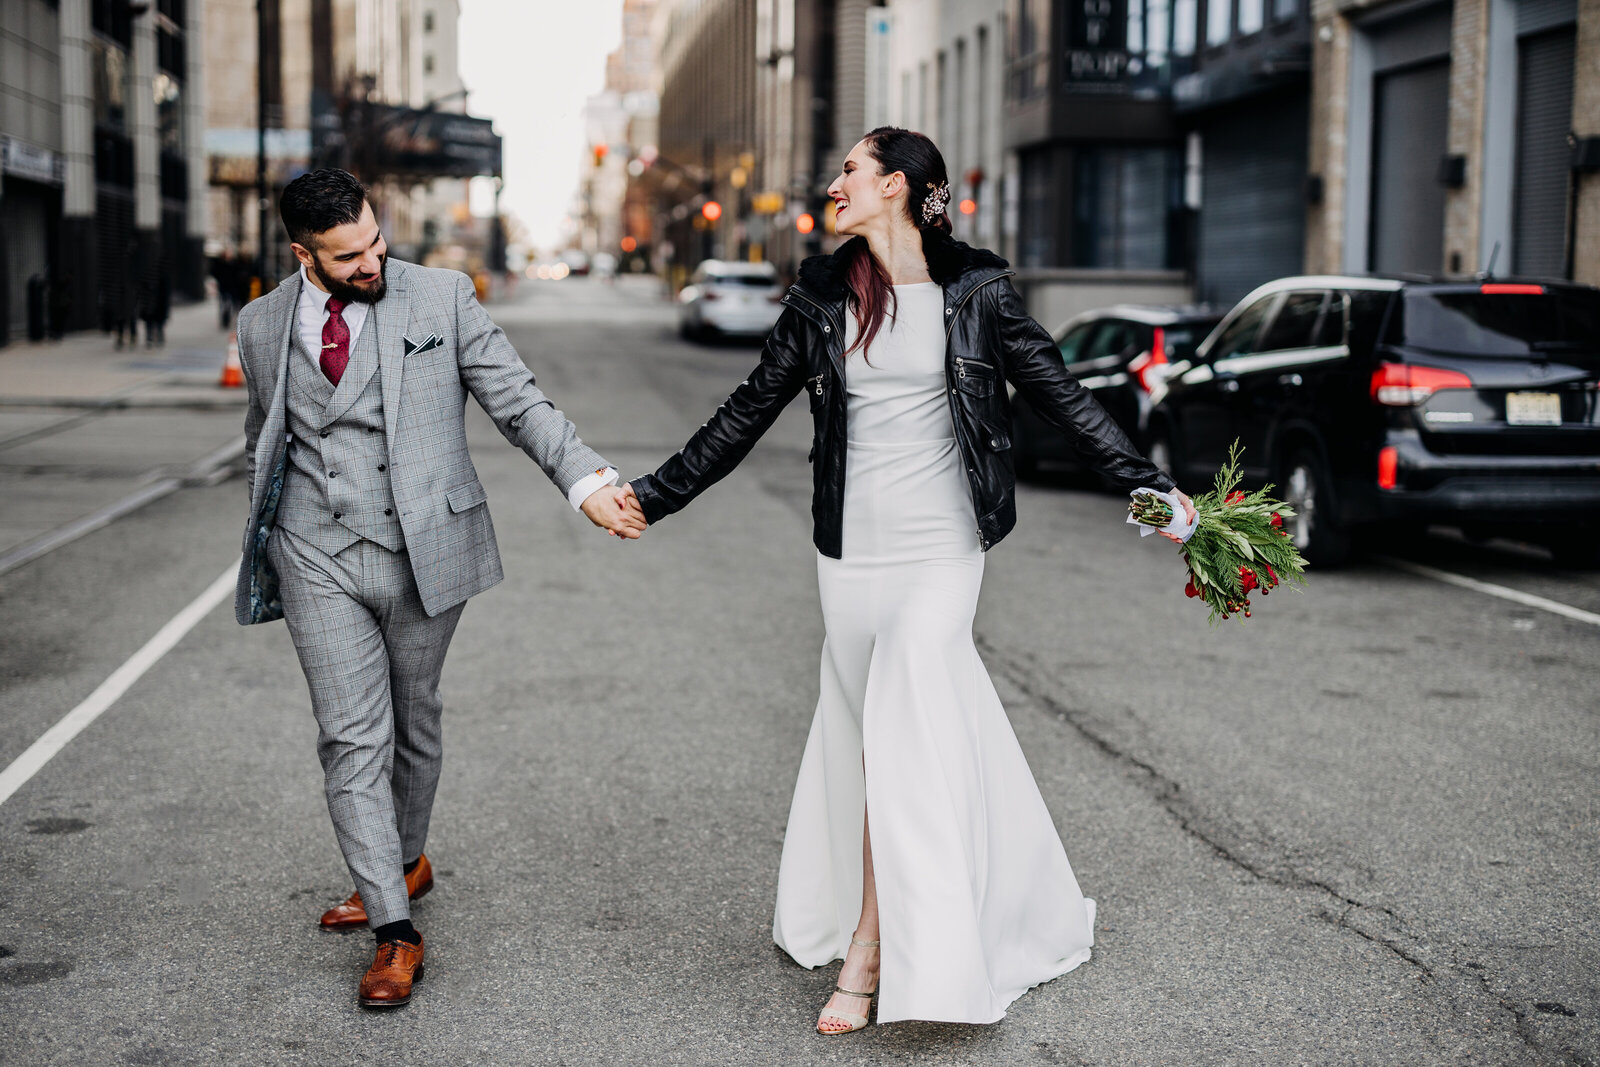 bride with leather jacket and groom walking down city street